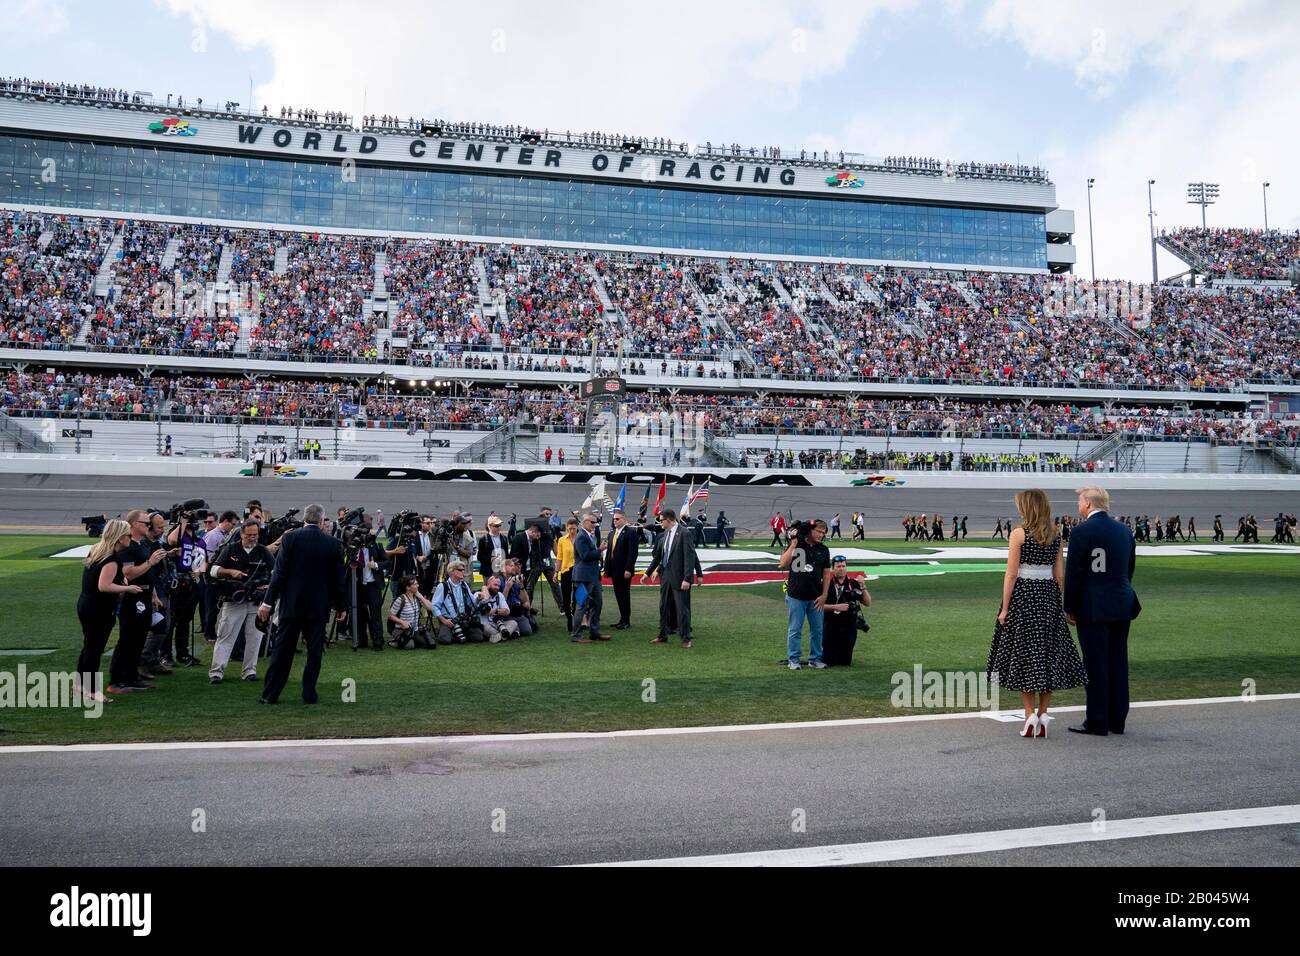 U.S President Donald Trump and First Lady Melania Trump, stand together on the track at Daytona International Speedway February 16, 2020 in Daytona Beach, Florida. Trump served as the official starter of the the NASCAR Daytona 500 auto race and took a ride in the presidential limousine around the track. Stock Photo